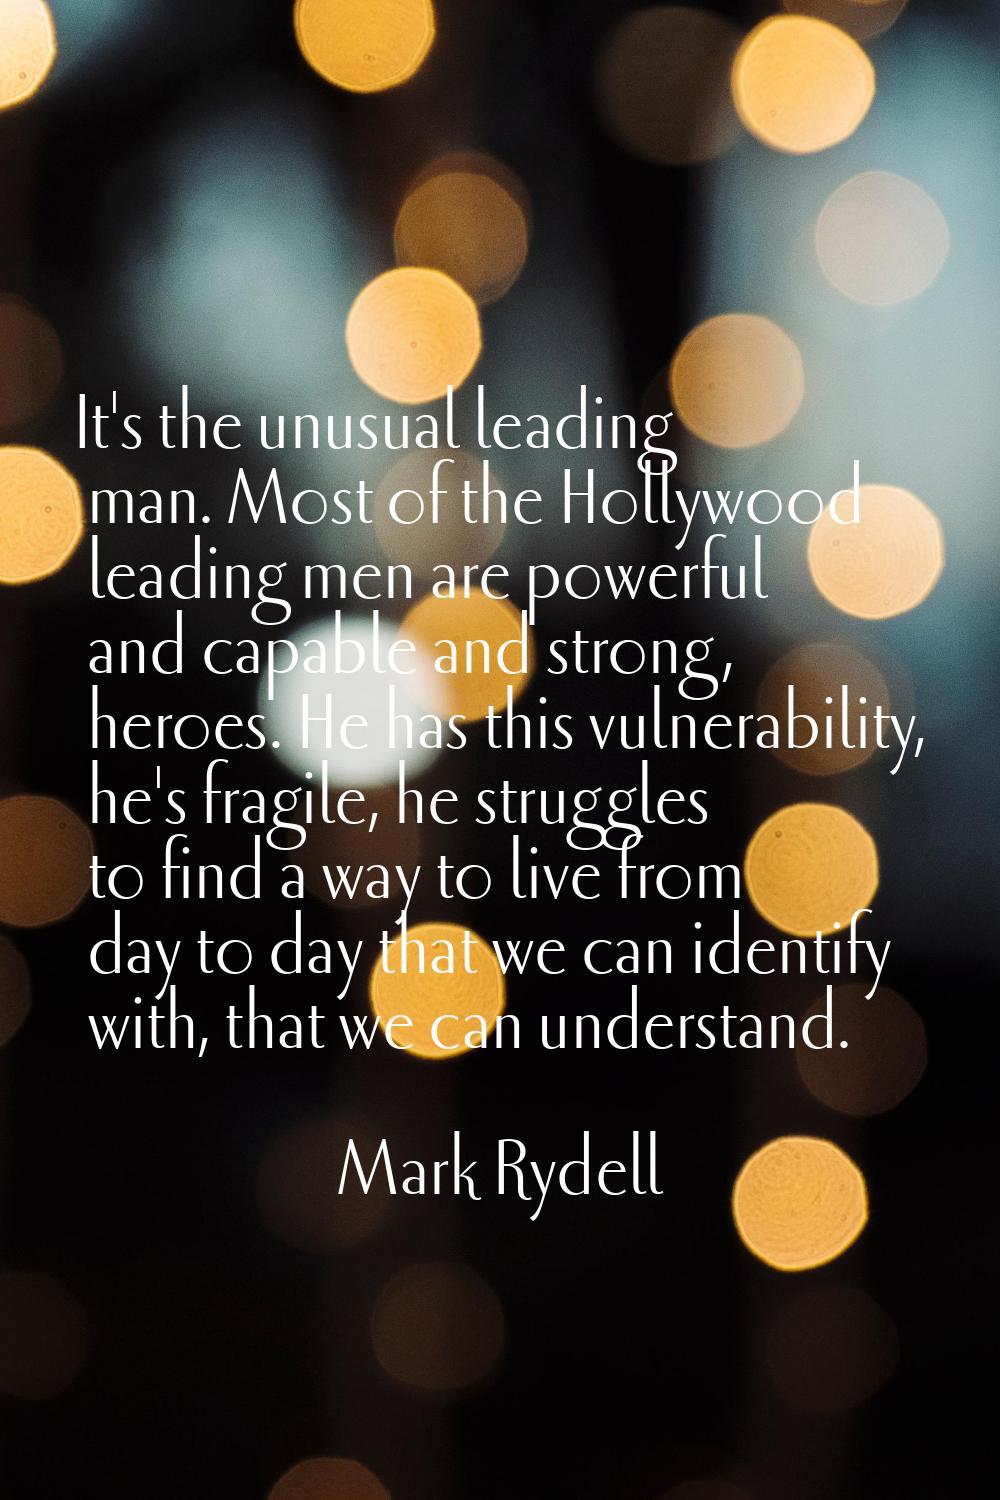 It's the unusual leading man. Most of the Hollywood leading men are powerful and capable and strong